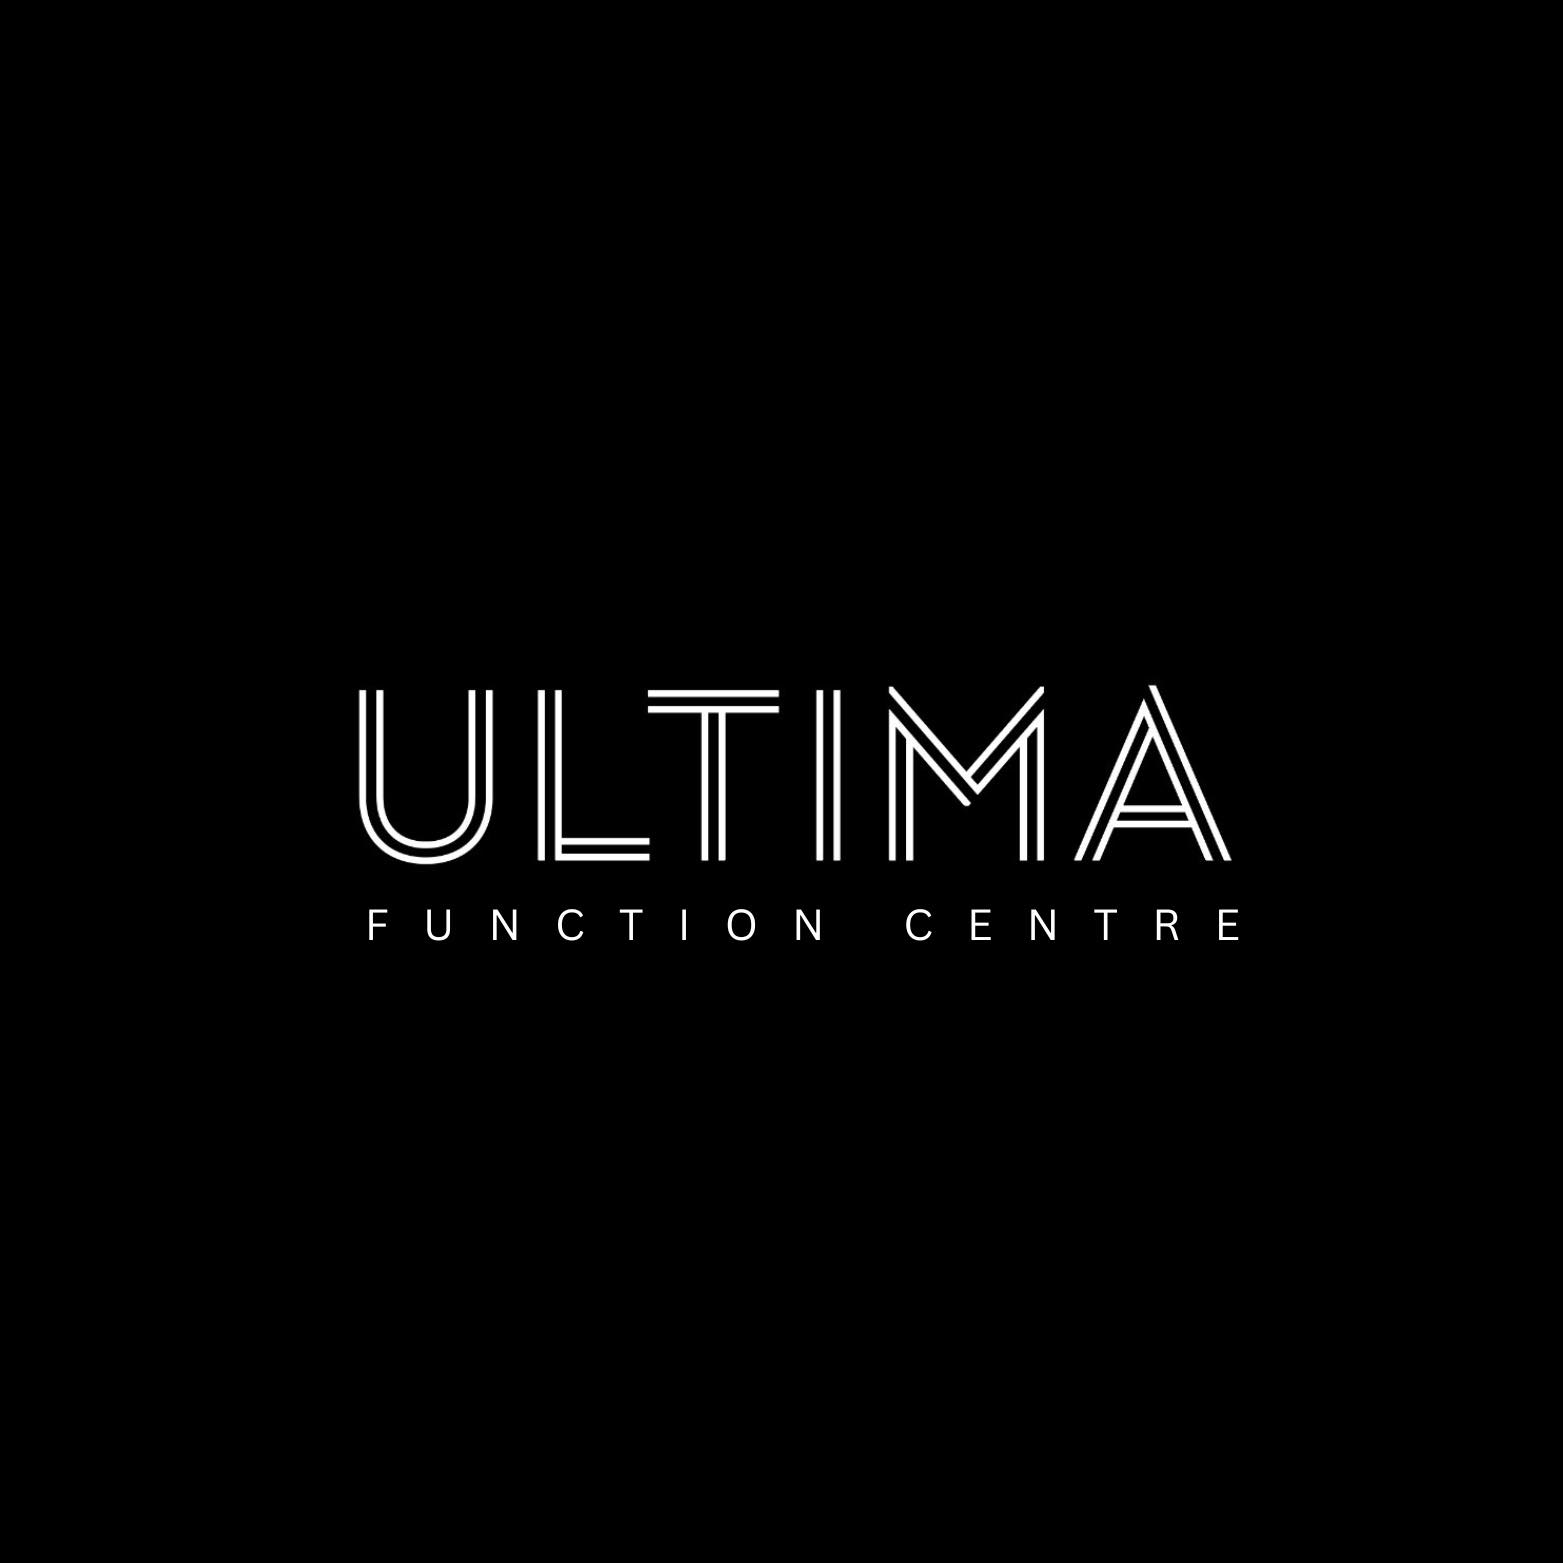 ultima function centre